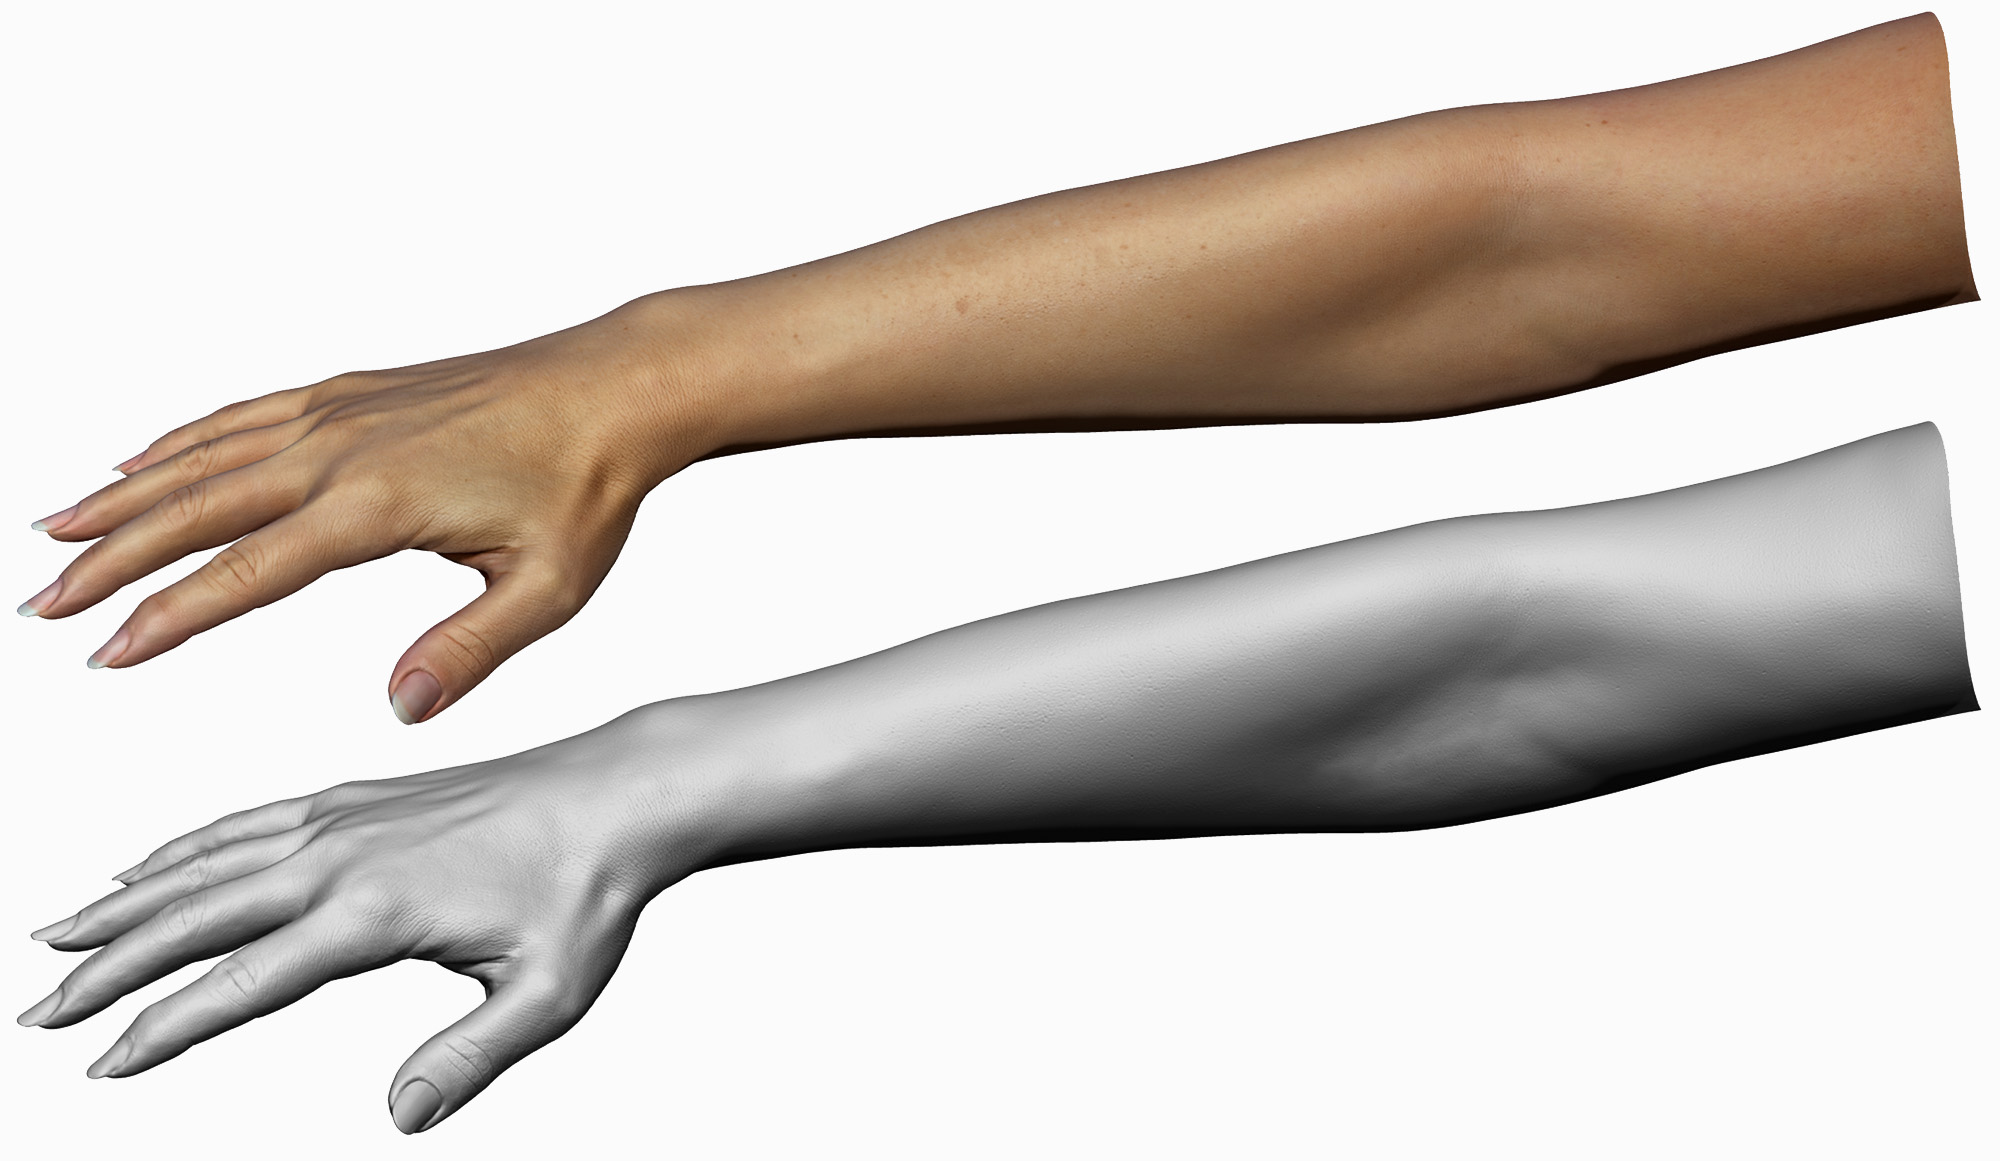 Forty Year old white female scanned from bicep to fingertip model in 3d